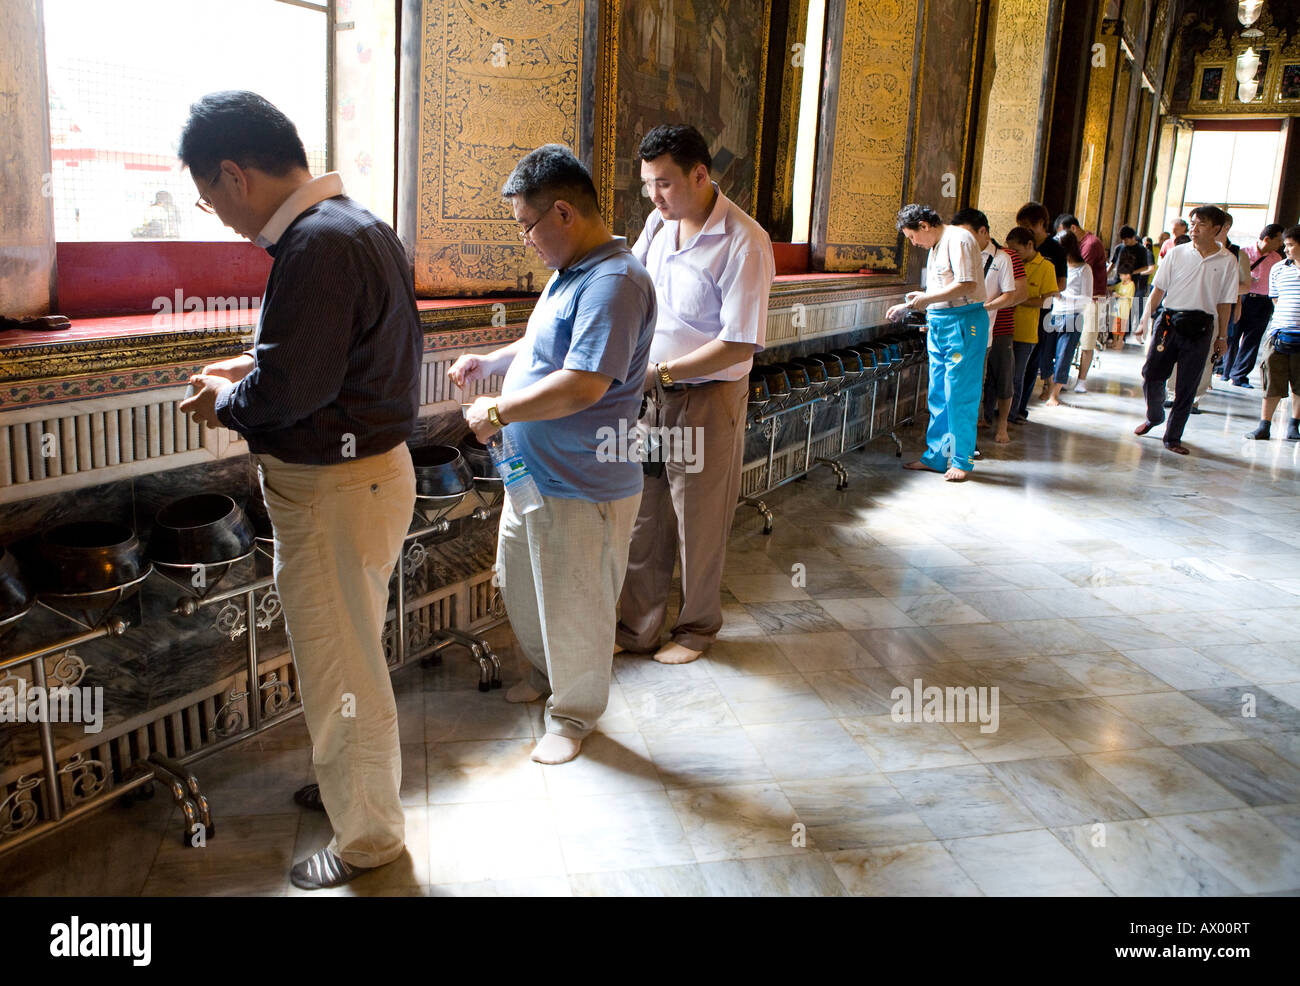 People Dropping Coins Into The Alms Meditation Collection Bowls Wat Po Thailand South East Asia Stock Photo